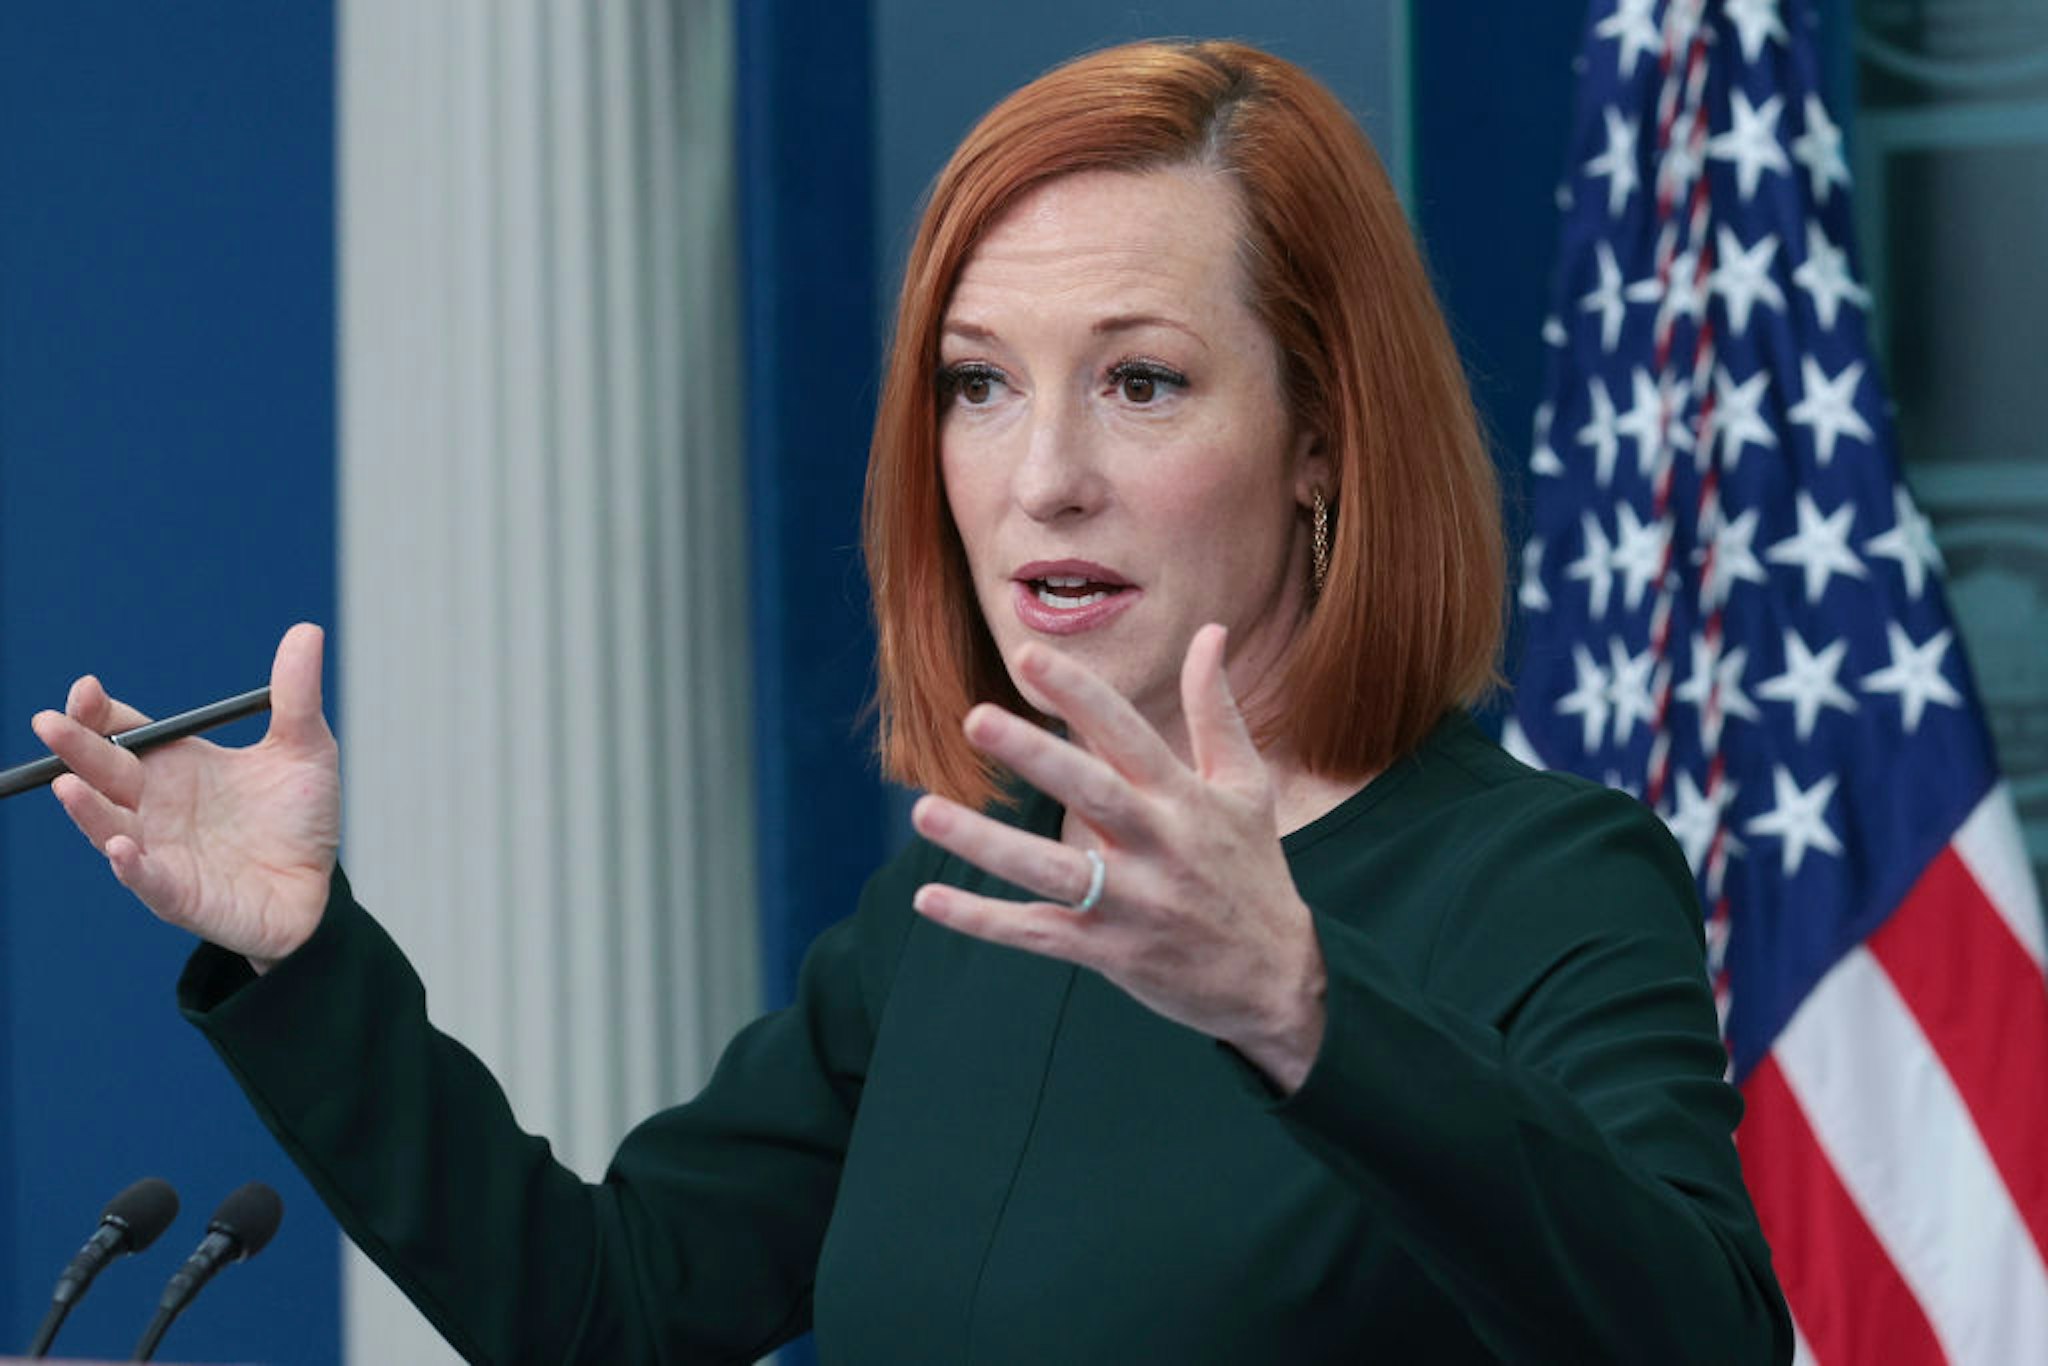 WASHINGTON, DC - MARCH 09: White House press secretary Jen Psaki answers questions during the daily briefing on March 09, 2022 in Washington, DC. Psaki answered a range of questions related primarily to Russia's invasion of Ukraine. (Photo by Win McNamee/Getty Images)